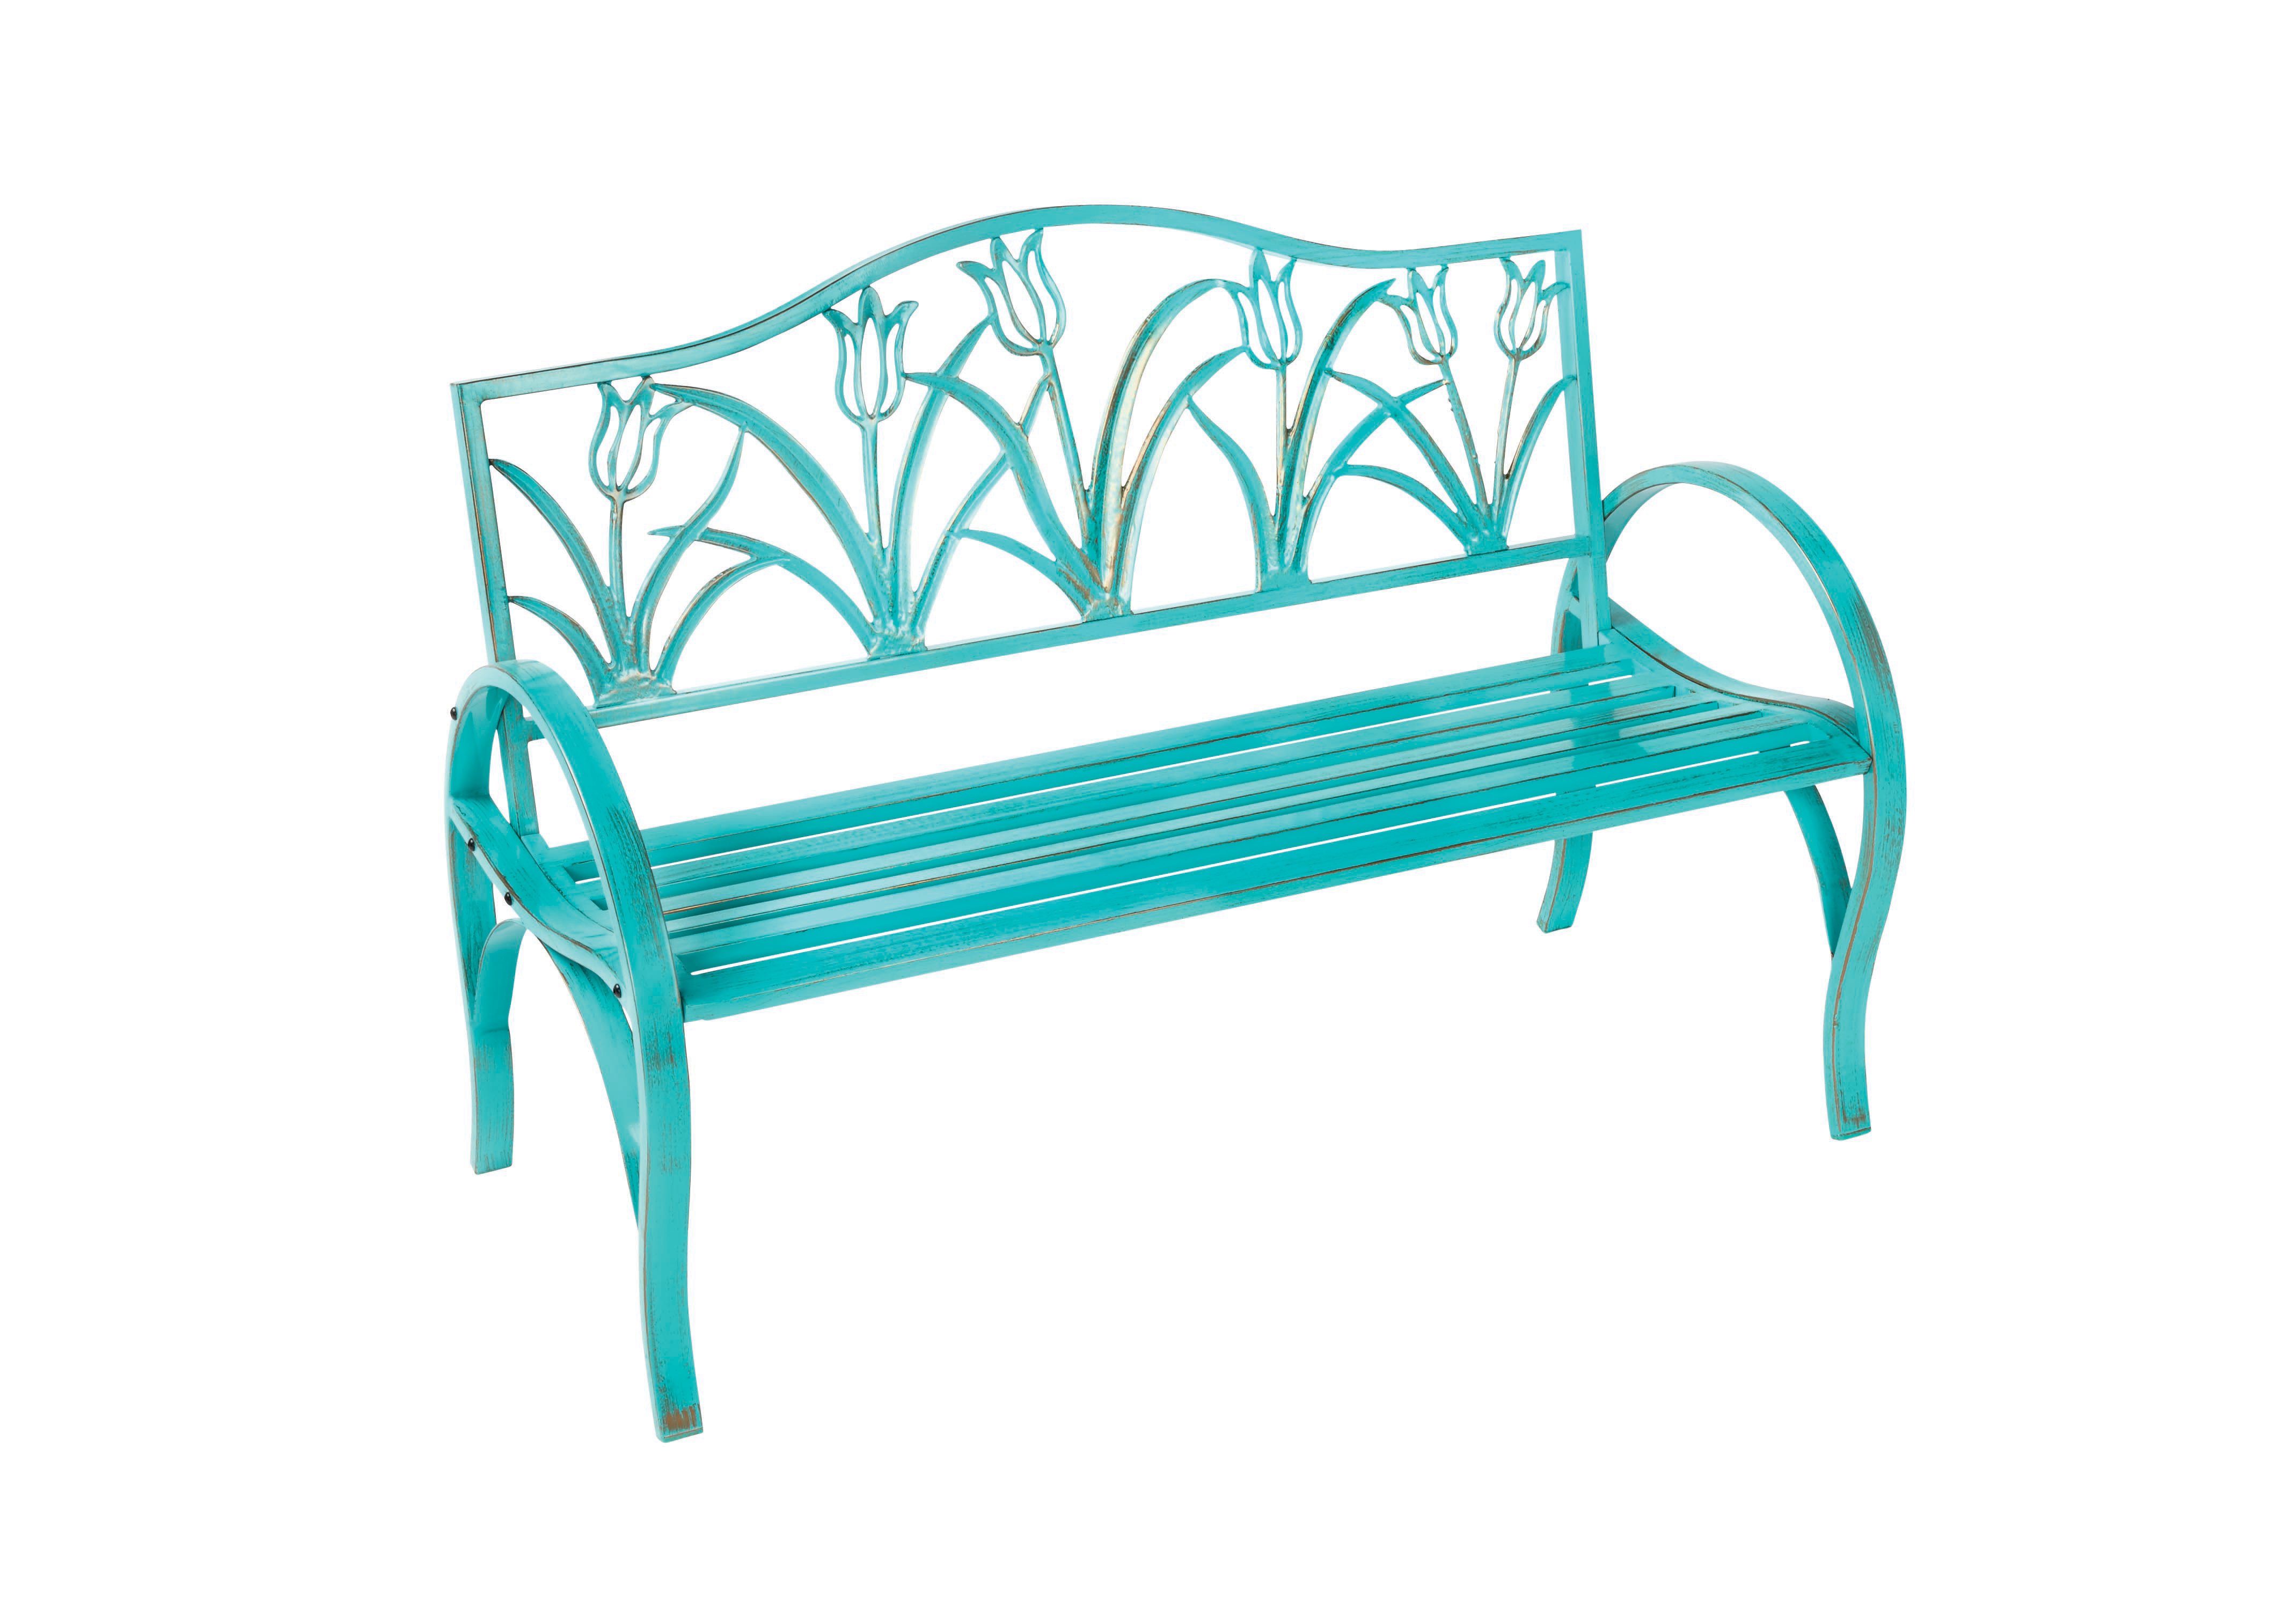 Teal outdoor bench